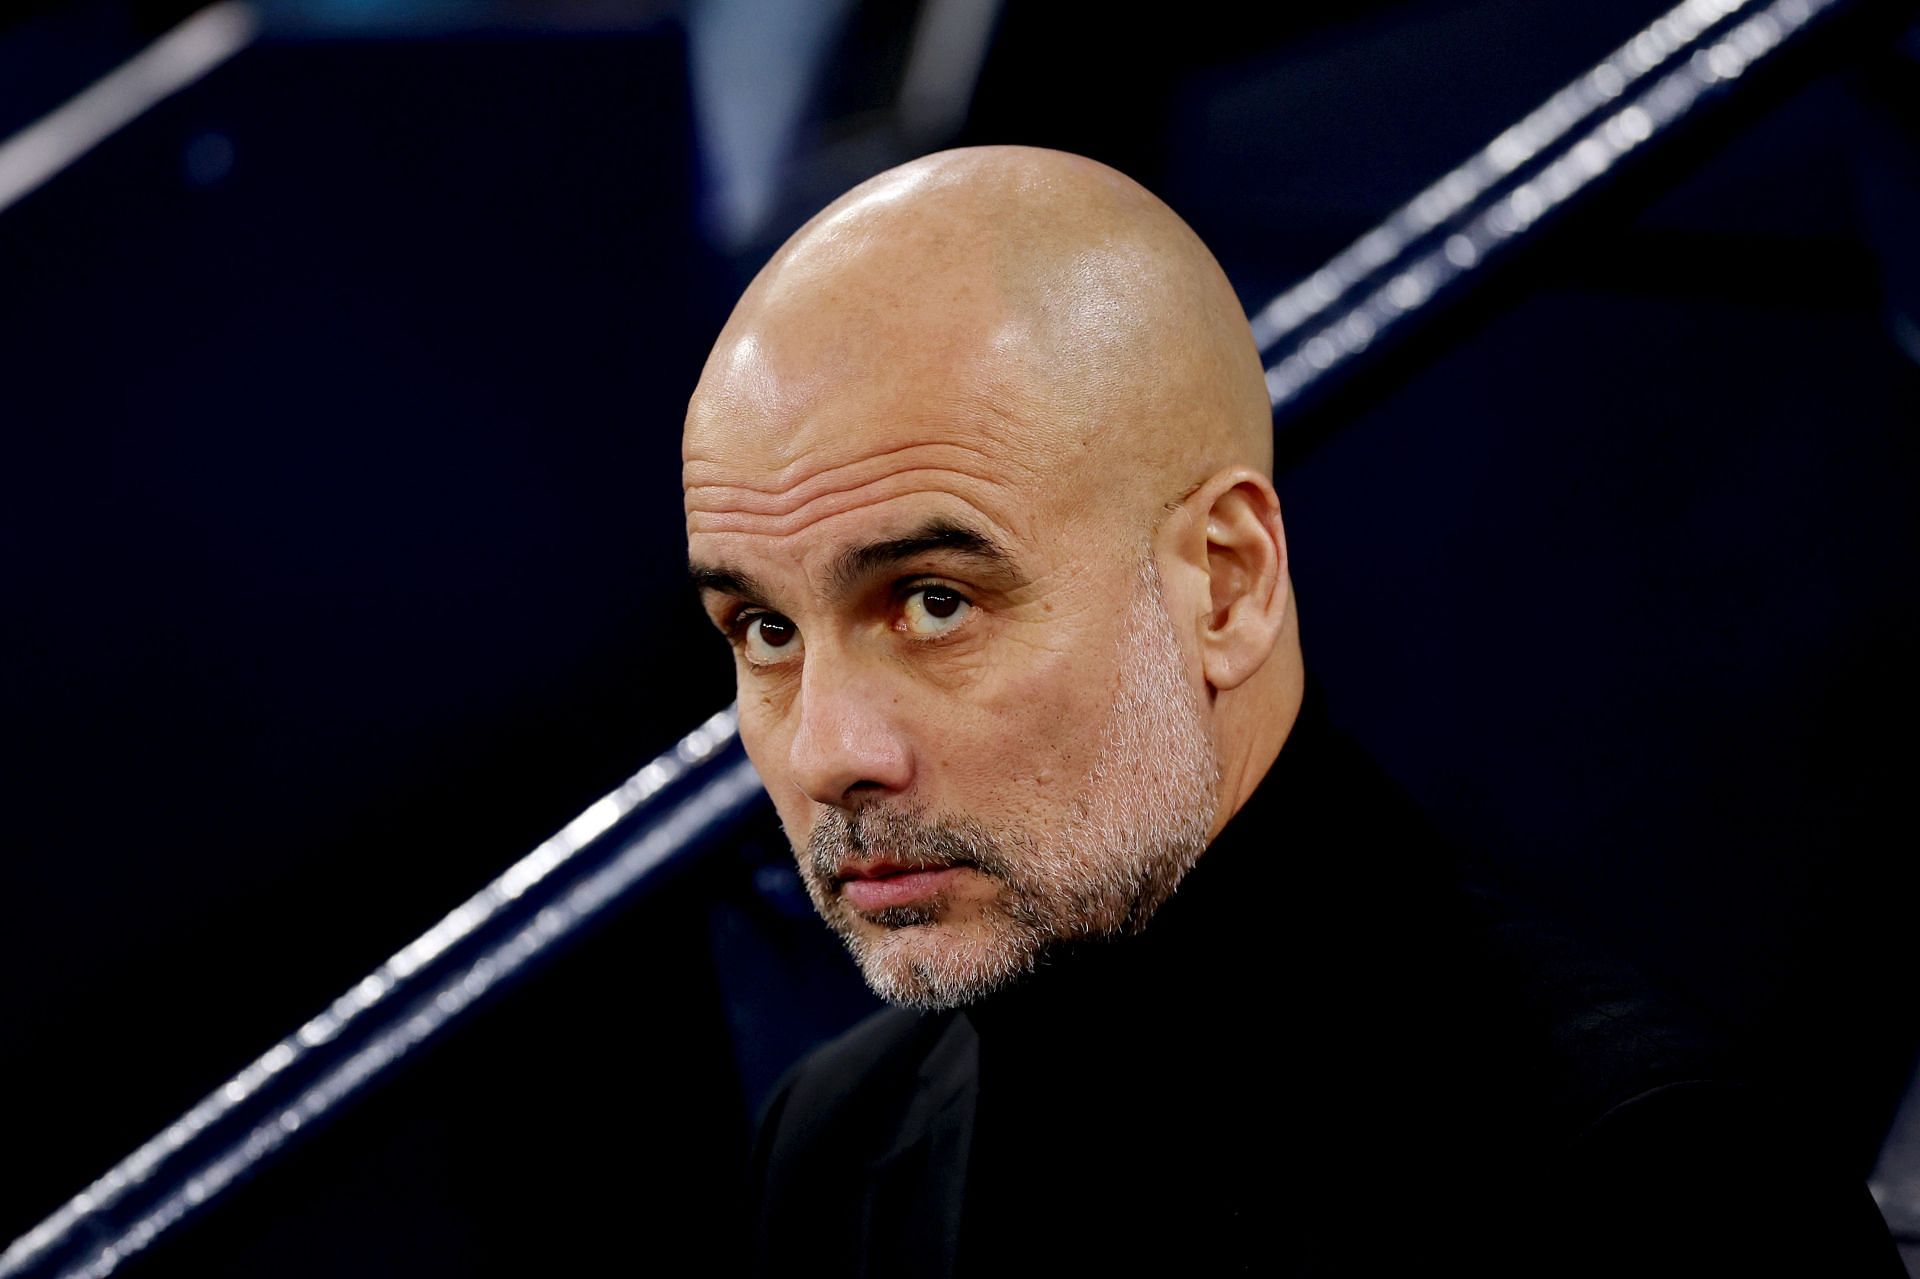 Pep Guardiola remained tight-lipped over the superstar duo.